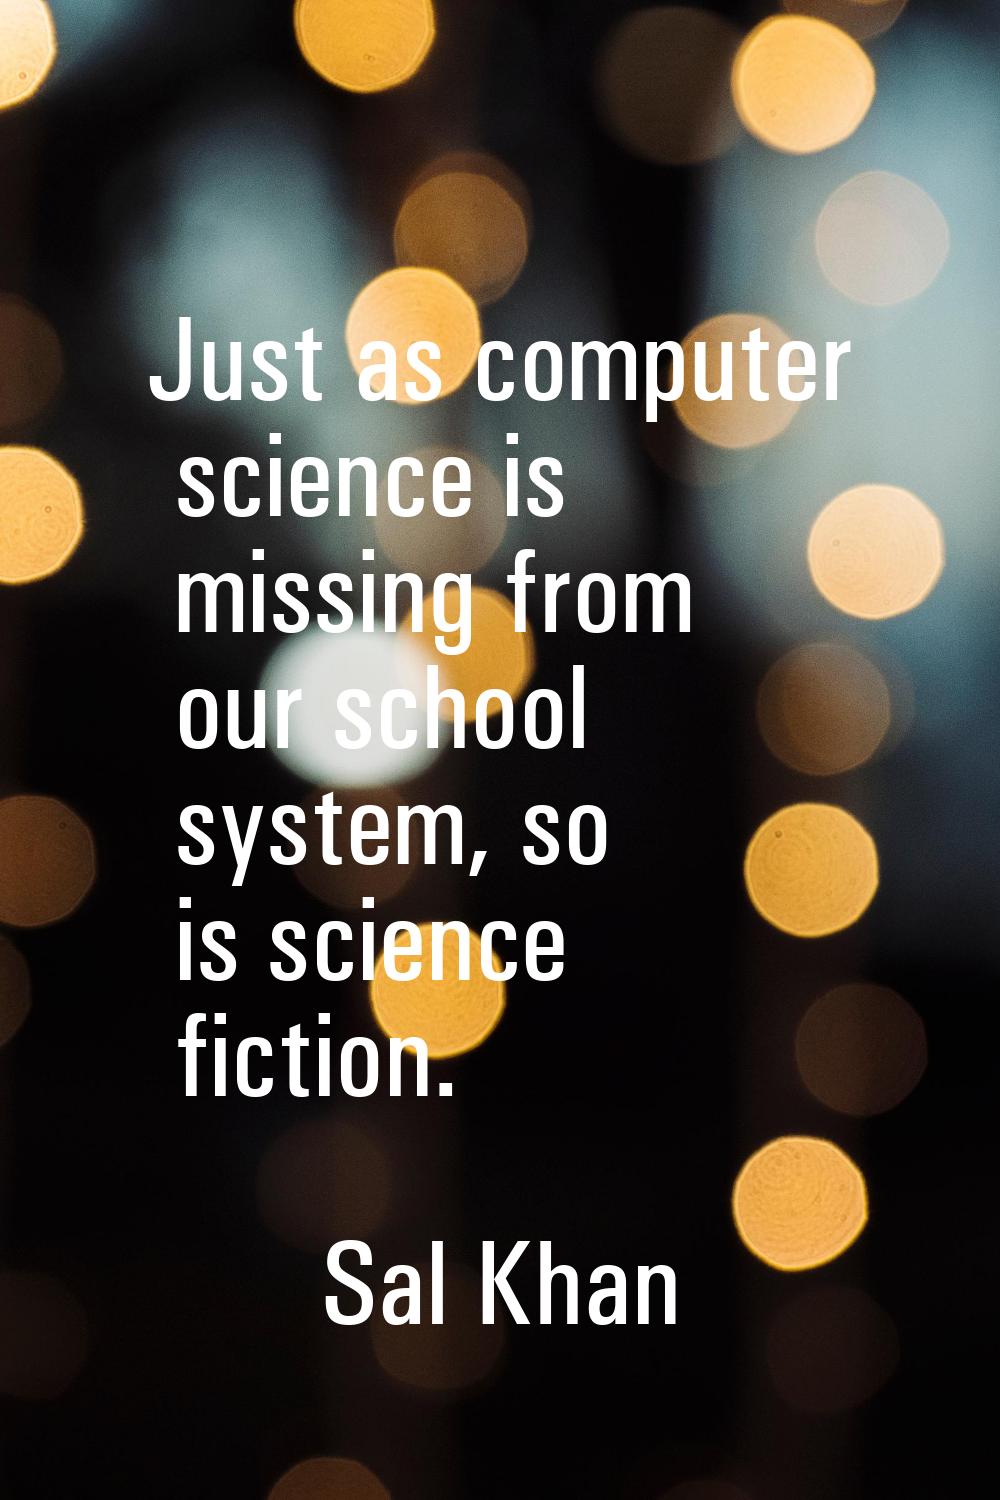 Just as computer science is missing from our school system, so is science fiction.